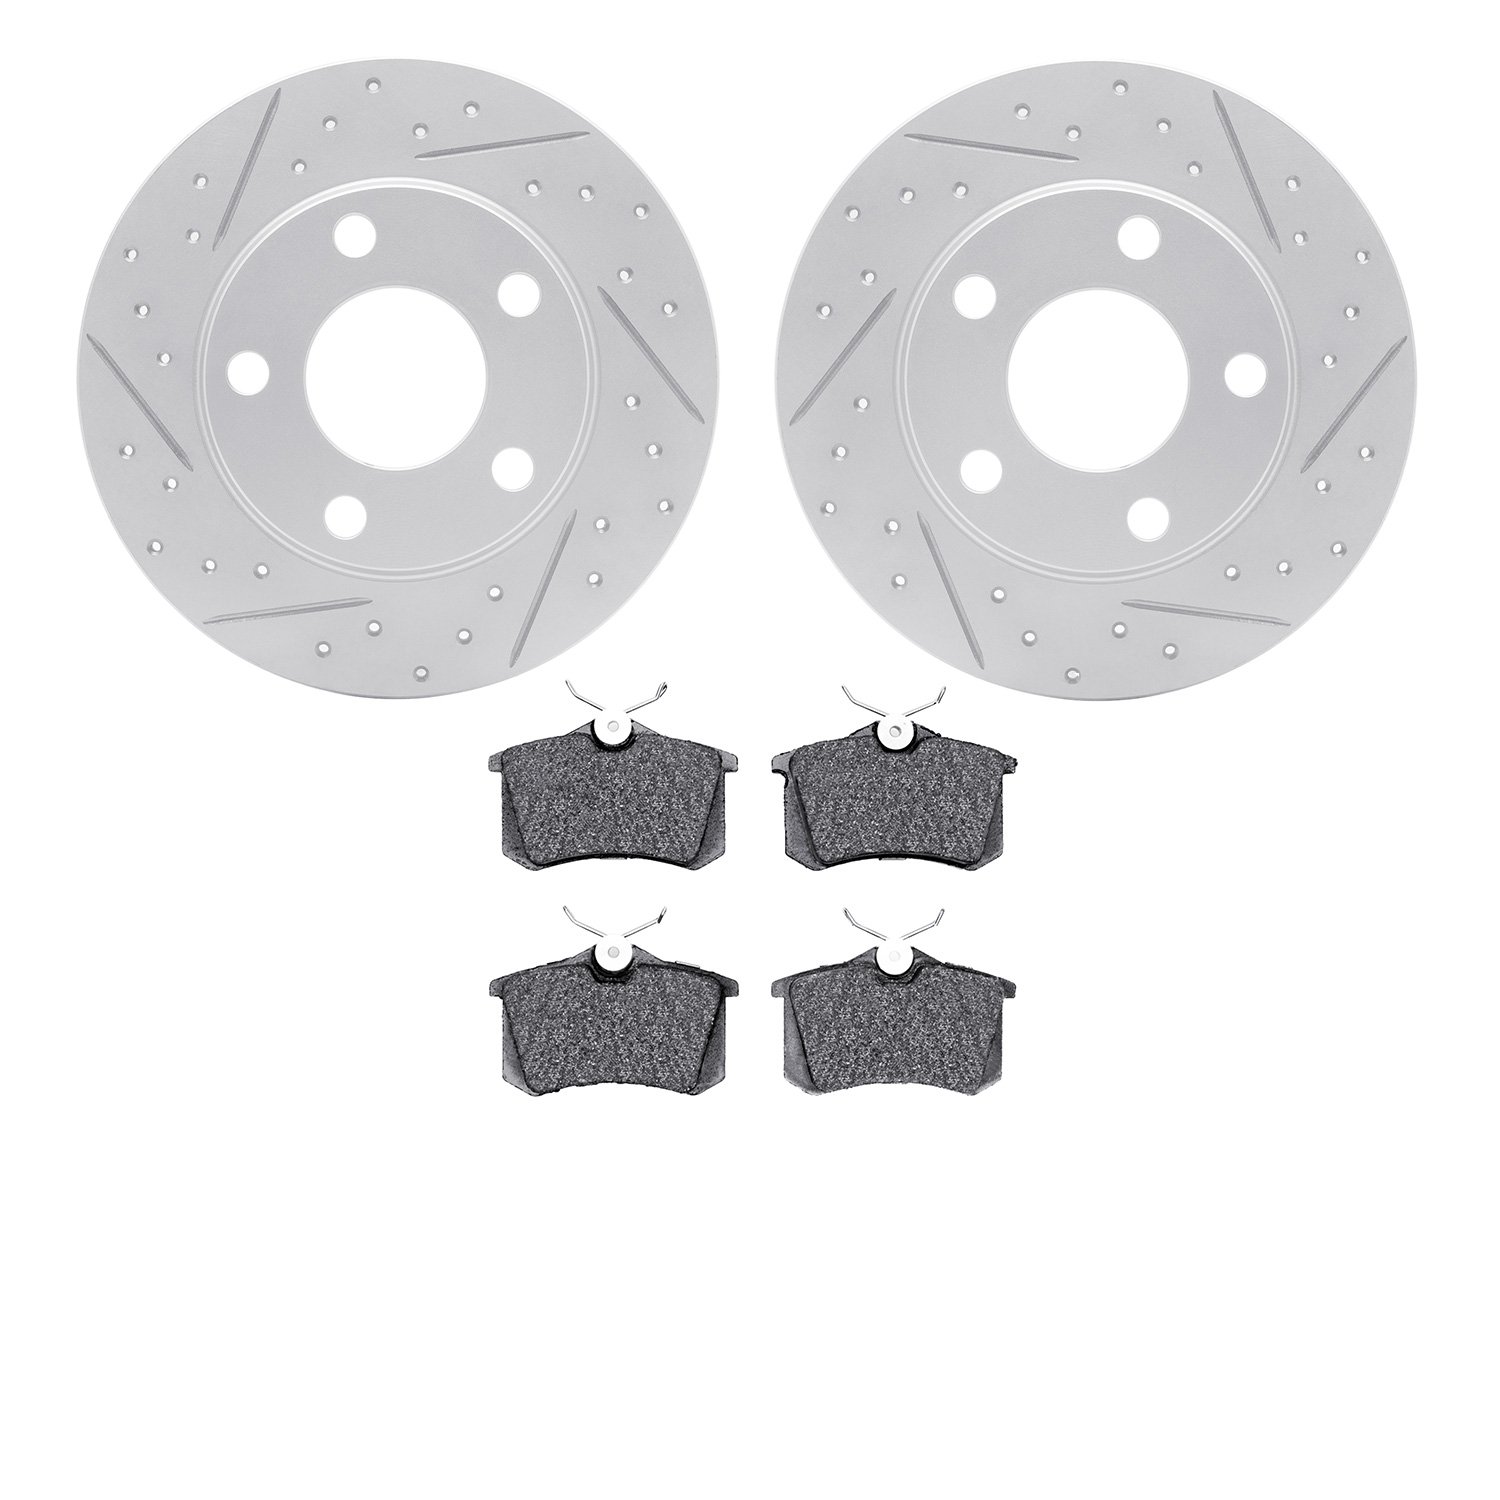 2502-73010 Geoperformance Drilled/Slotted Rotors w/5000 Advanced Brake Pads Kit, 2001-2005 Audi/Volkswagen, Position: Rear